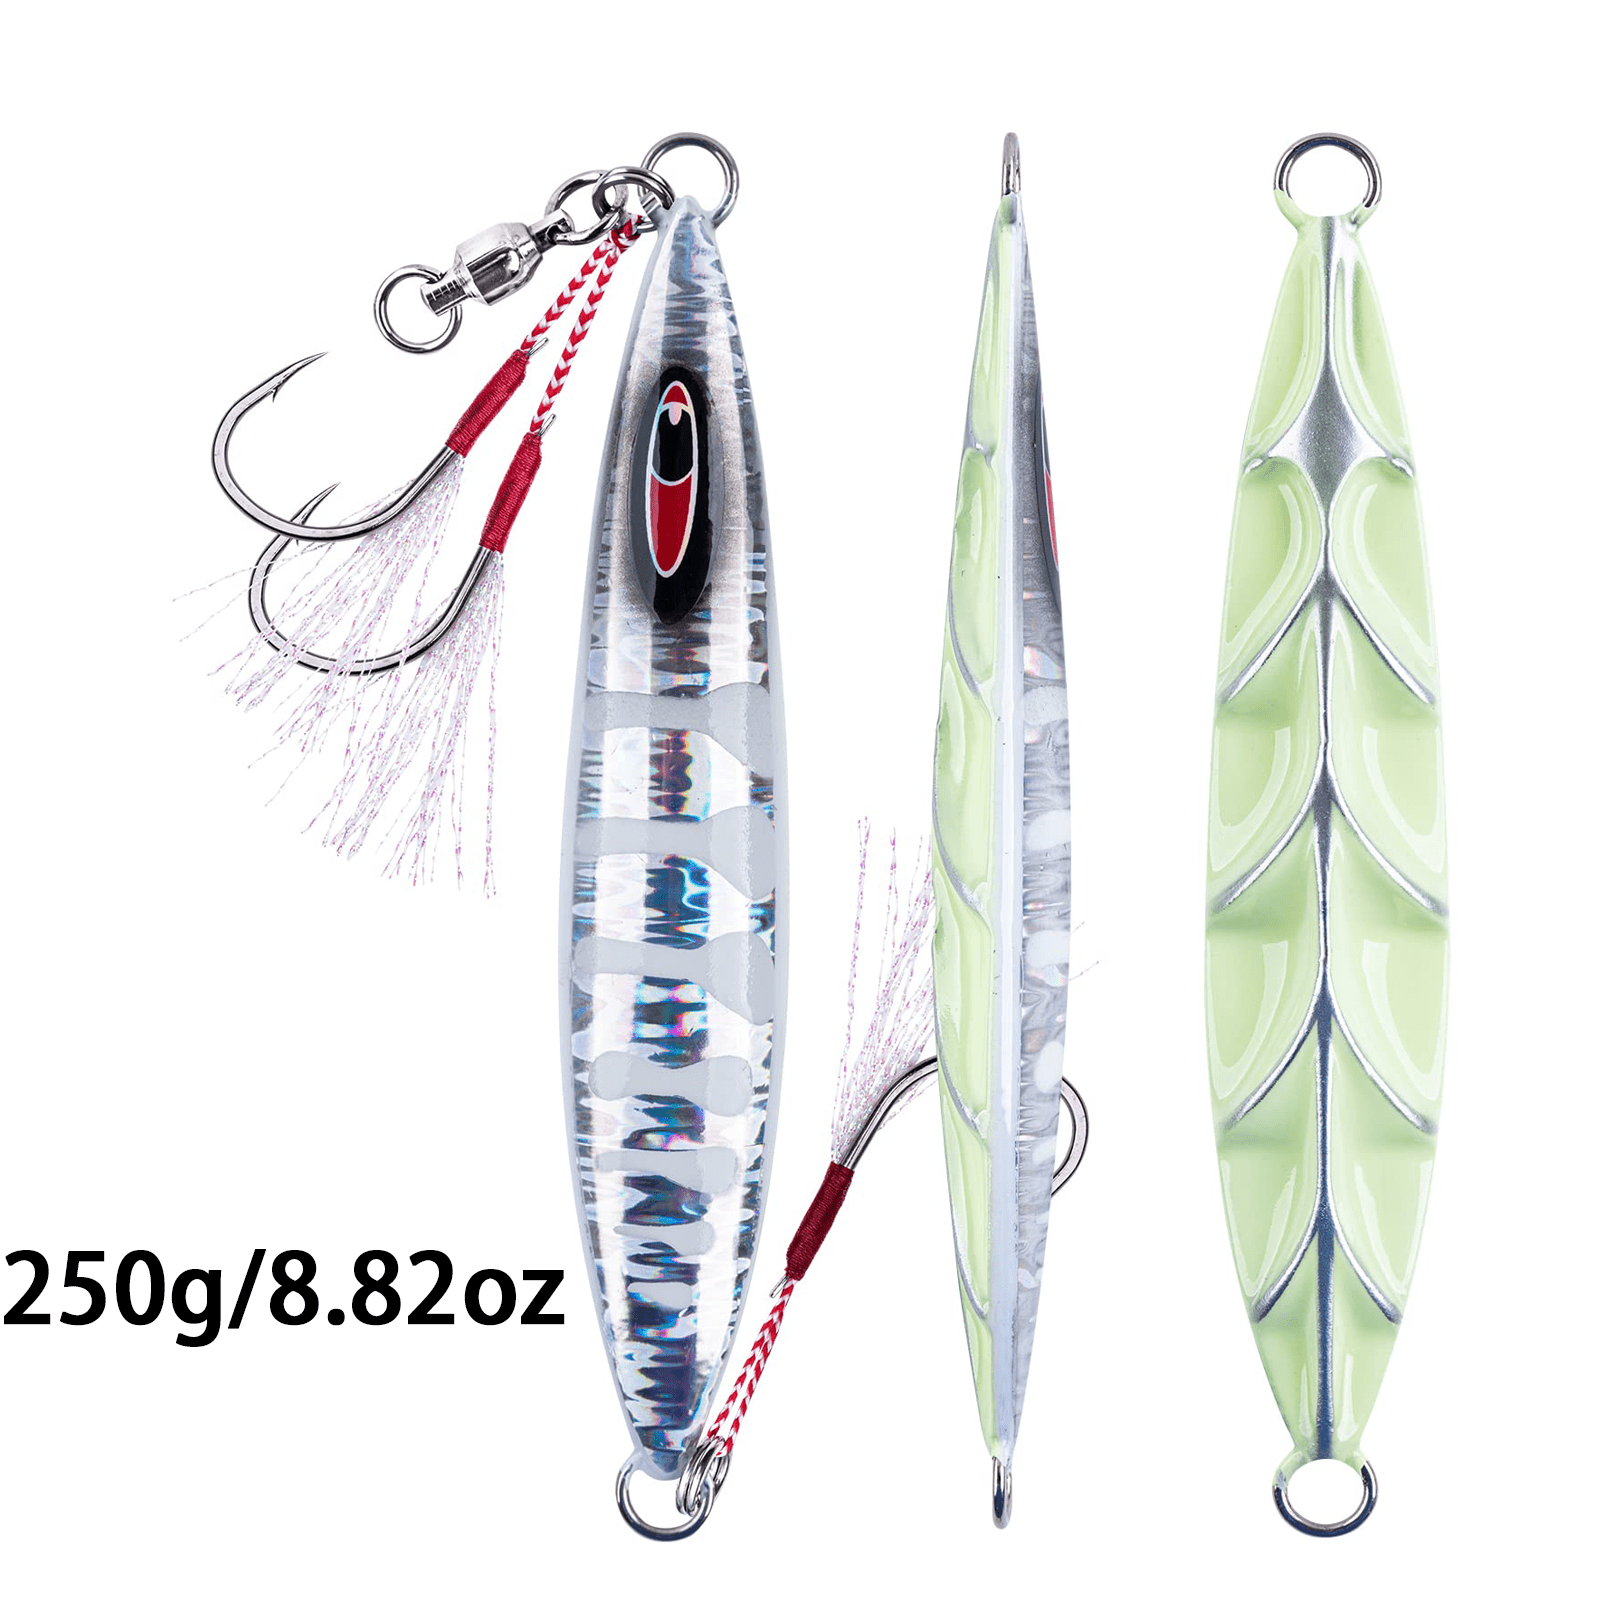 2 X Fishing Jigging Lead Fish Rolls Bags Fishing Tackle Special Offer